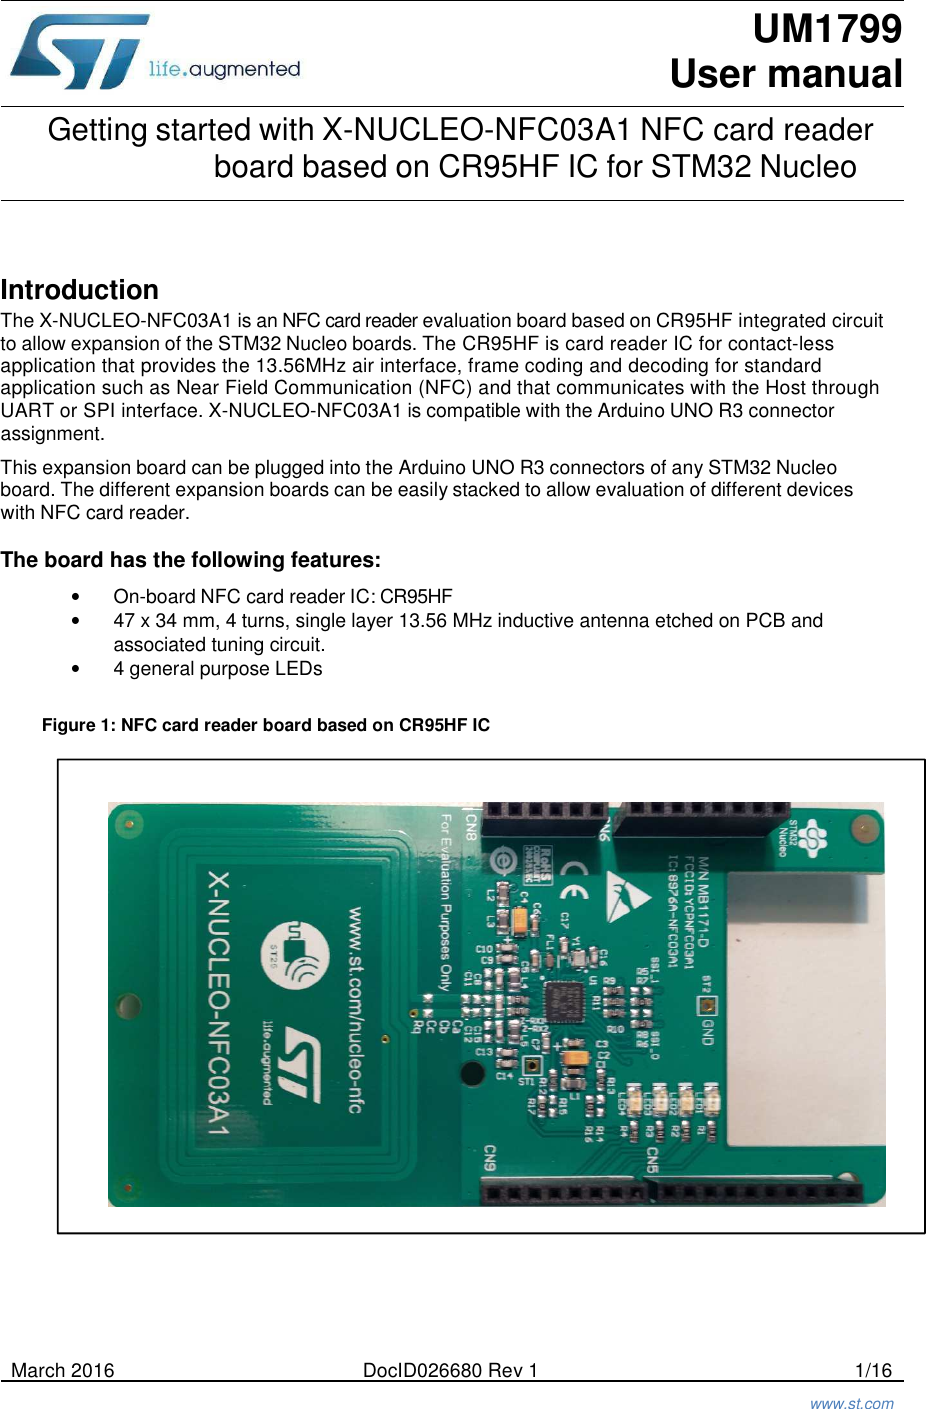 UM1799 User manual  Getting started with X-NUCLEO-NFC03A1 NFC card reader board based on CR95HF IC for STM32 Nucleo     Introduction The X-NUCLEO-NFC03A1 is an NFC card reader evaluation board based on CR95HF integrated circuit to allow expansion of the STM32 Nucleo boards. The CR95HF is card reader IC for contact-less application that provides the 13.56MHz air interface, frame coding and decoding for standard application such as Near Field Communication (NFC) and that communicates with the Host through UART or SPI interface. X-NUCLEO-NFC03A1 is compatible with the Arduino UNO R3 connector assignment.  This expansion board can be plugged into the Arduino UNO R3 connectors of any STM32 Nucleo board. The different expansion boards can be easily stacked to allow evaluation of different devices with NFC card reader.  The board has the following features:  • On-board NFC card reader IC: CR95HF • 47 x 34 mm, 4 turns, single layer 13.56 MHz inductive antenna etched on PCB and associated tuning circuit. • 4 general purpose LEDs   Figure 1: NFC card reader board based on CR95HF IC                                  March 2016  DocID026680 Rev 1  1/16    www.st.com 